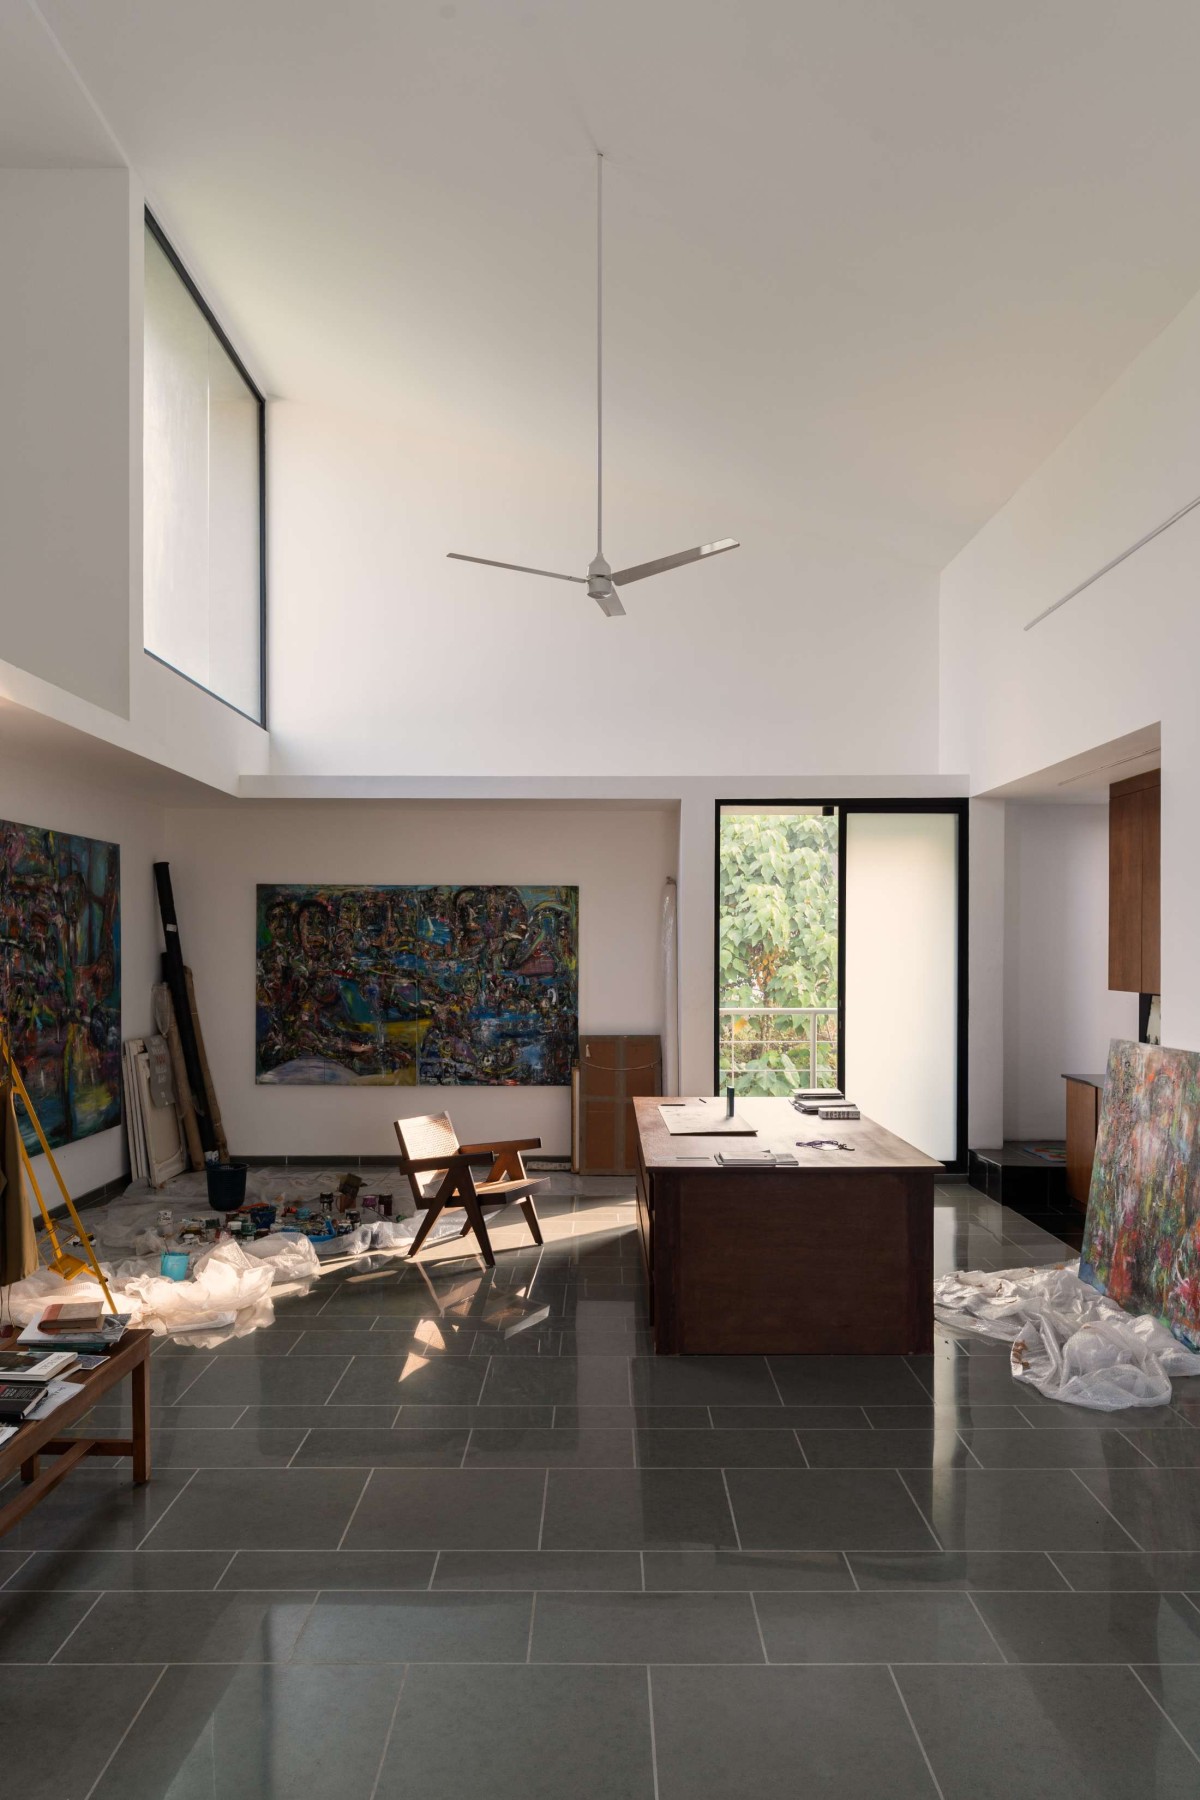 Studio of Artist Residence & Atelier by Cochin Creative Collective